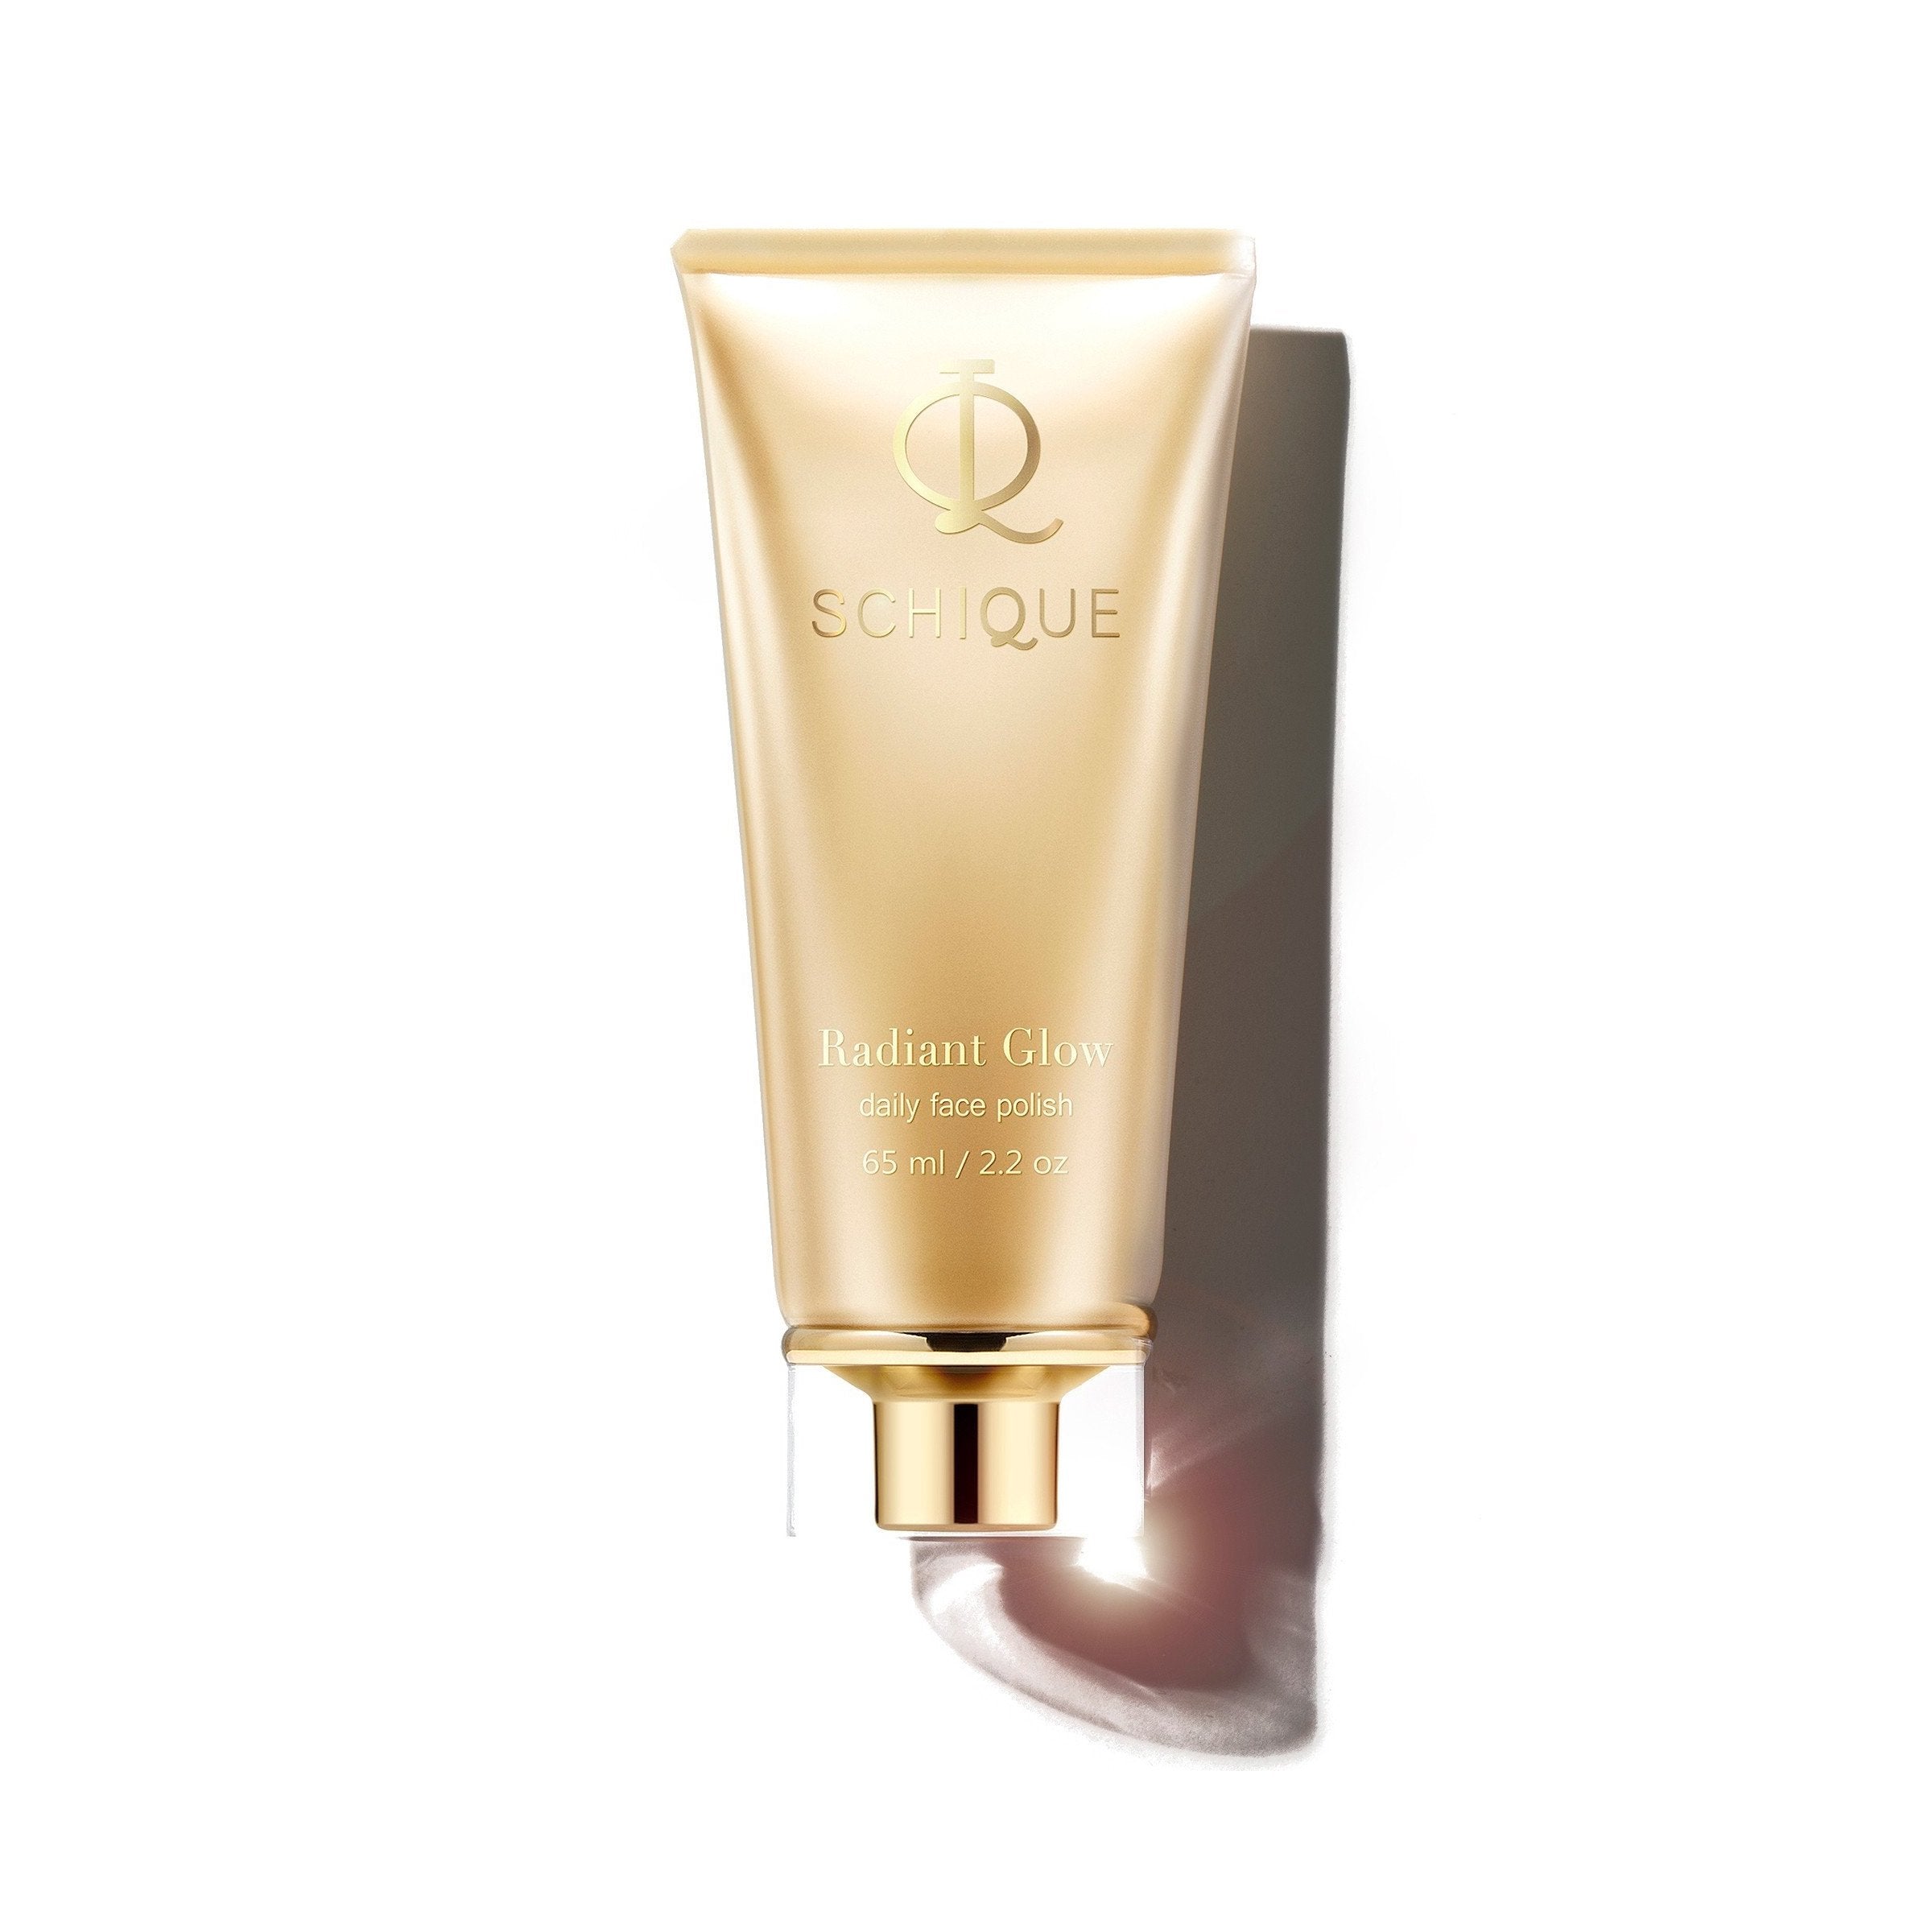 Schique Radiant Glow Daily Face Scrub